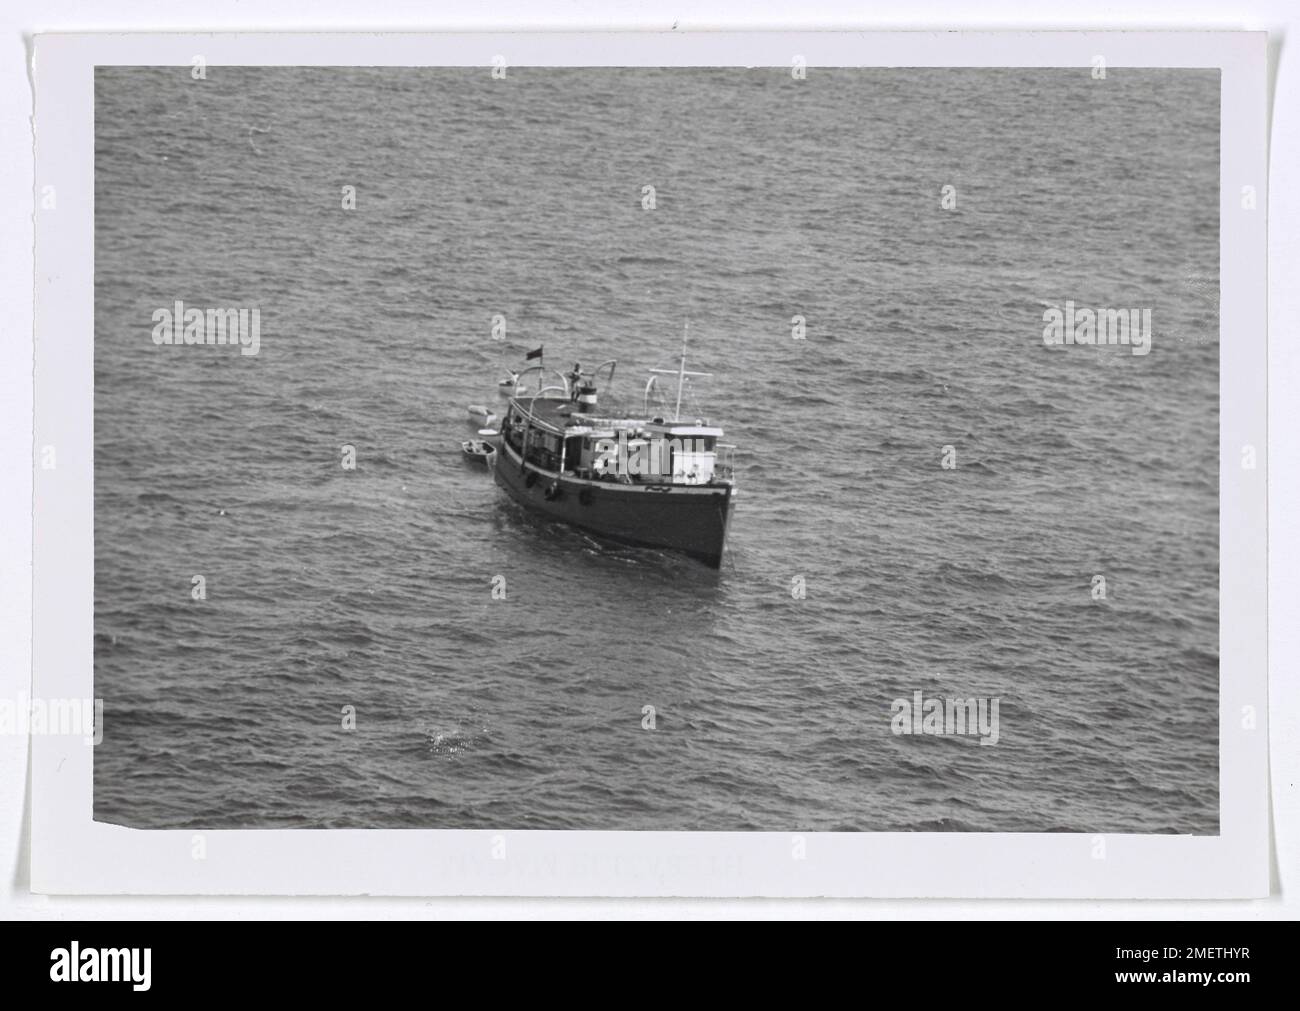 Photograph of Madam Elizabeth Near Bimini. This image is one of a set of photographs taken of the fishing vessels involved in a shooting incident 12 March near Bimini. These photos were not released as no Coast Guard action was involved and the vessels were Bahamian and Cuban. The photos were shot with a K-20 aerial camera by an air crewman, and not by one of the rated photographers assigned. Stock Photo